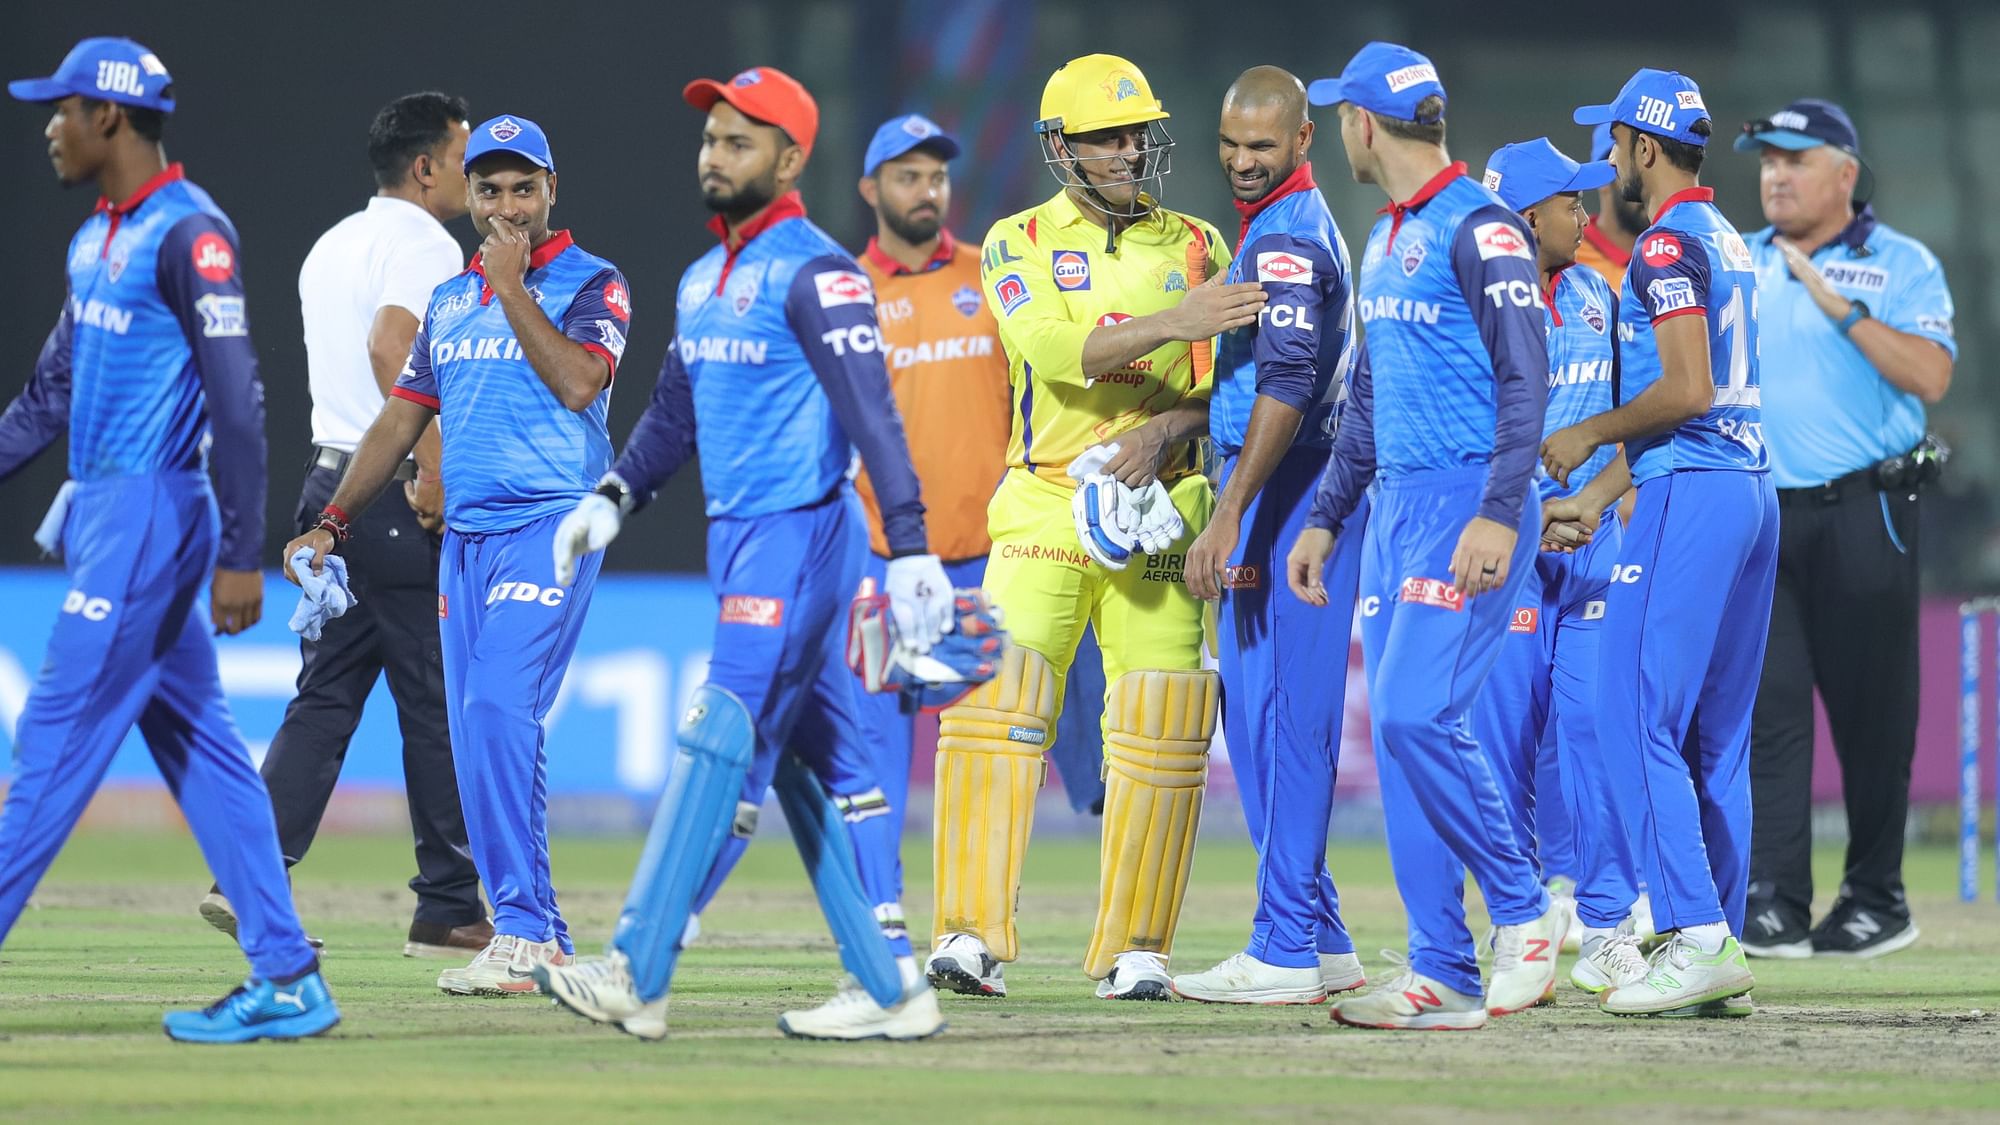 Chennai Super Kings won the match in the final over with two balls to spare.